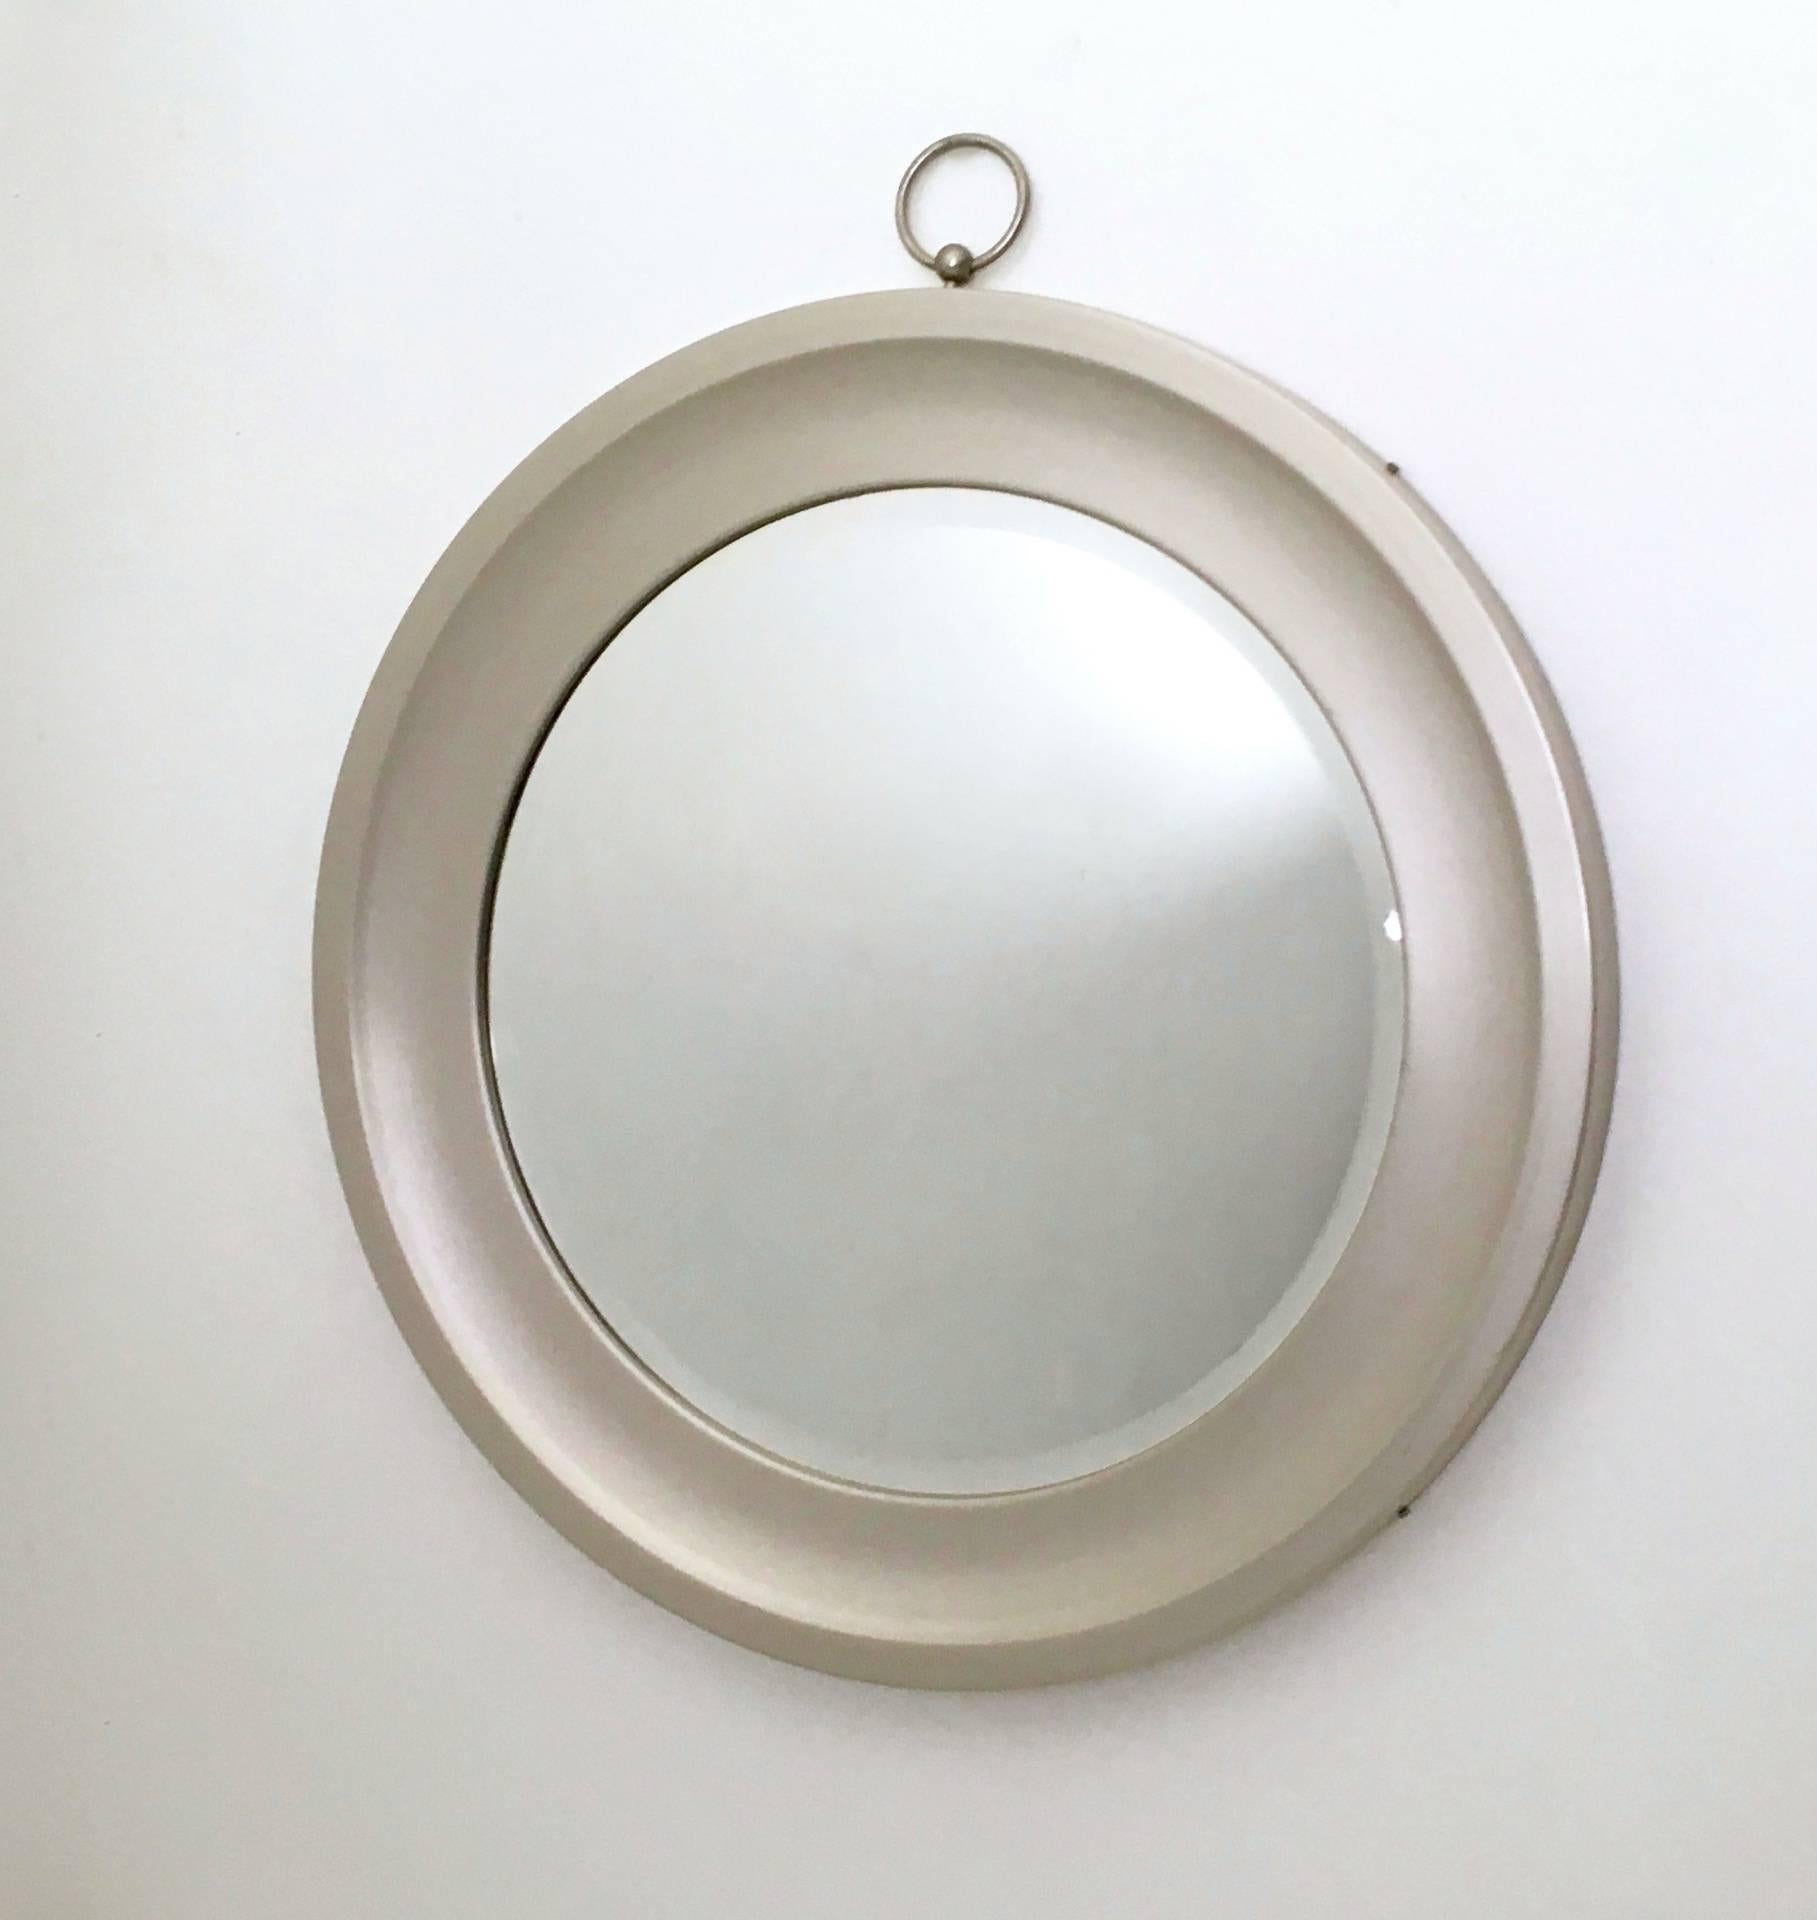 Made in Italy, 1970s. 
This mirror features a steel frame.
It is a vintage piece, therefore it might show slight traces of use, but it can be considered as in excellent original condition and ready to become a piece in a home.

Measure: Diameter: 60